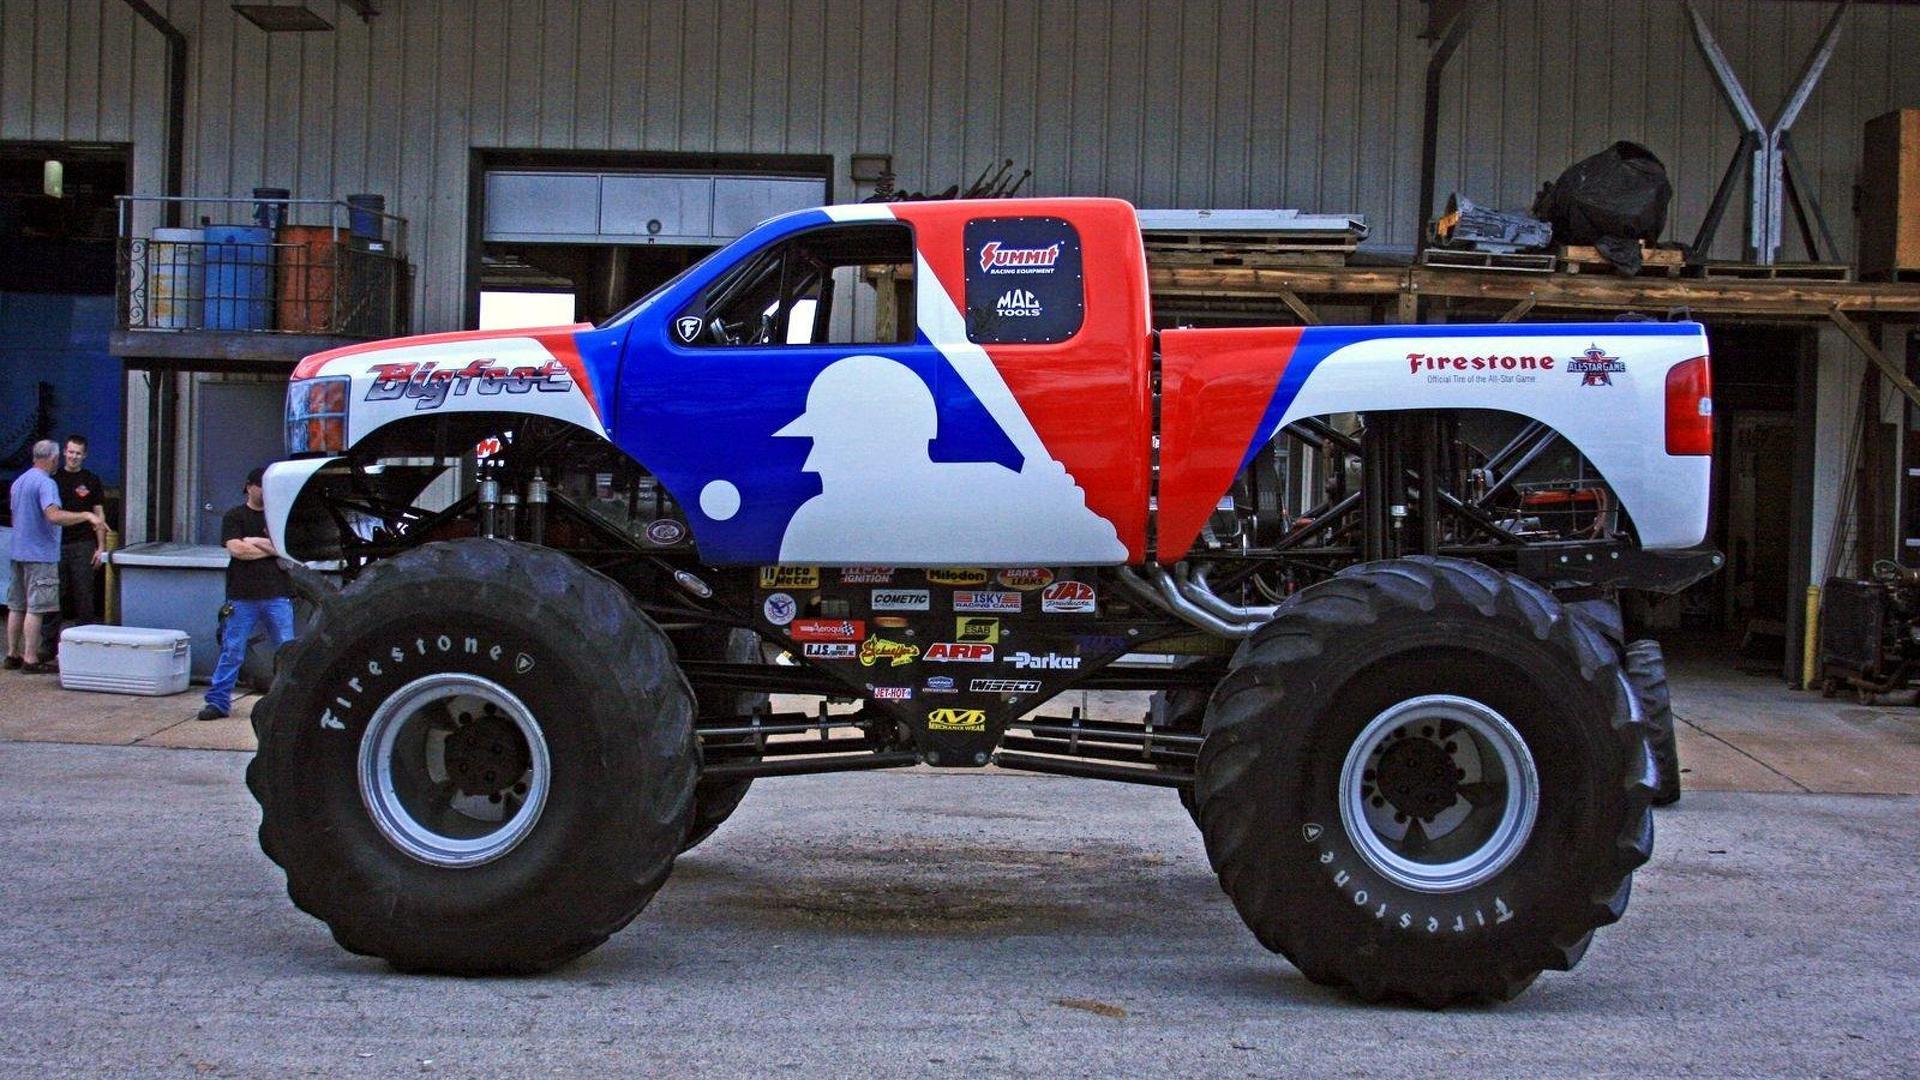 Bigfoot monster truck defects from Ford to Chevrolet after 35 years